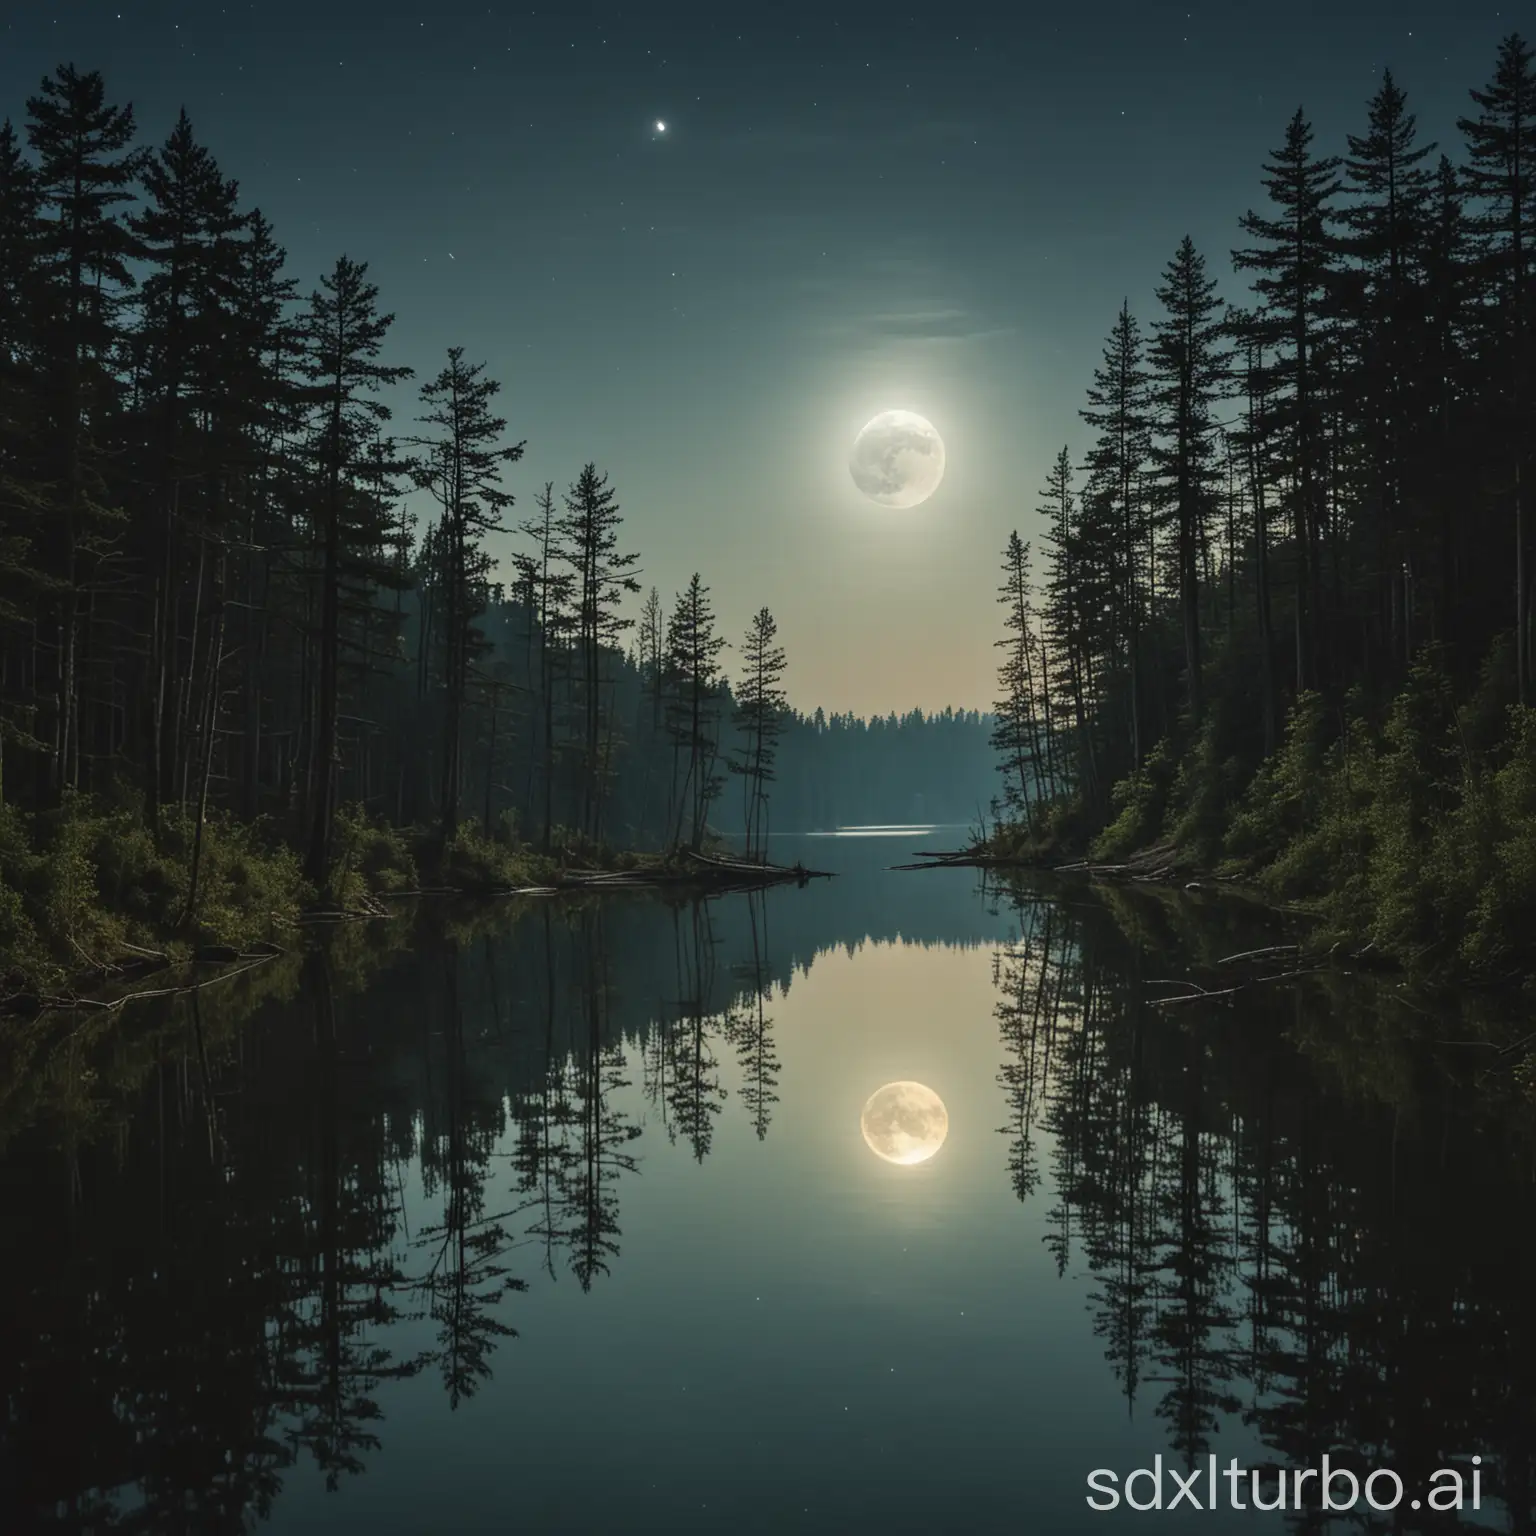 Forests, lakes, the moon.